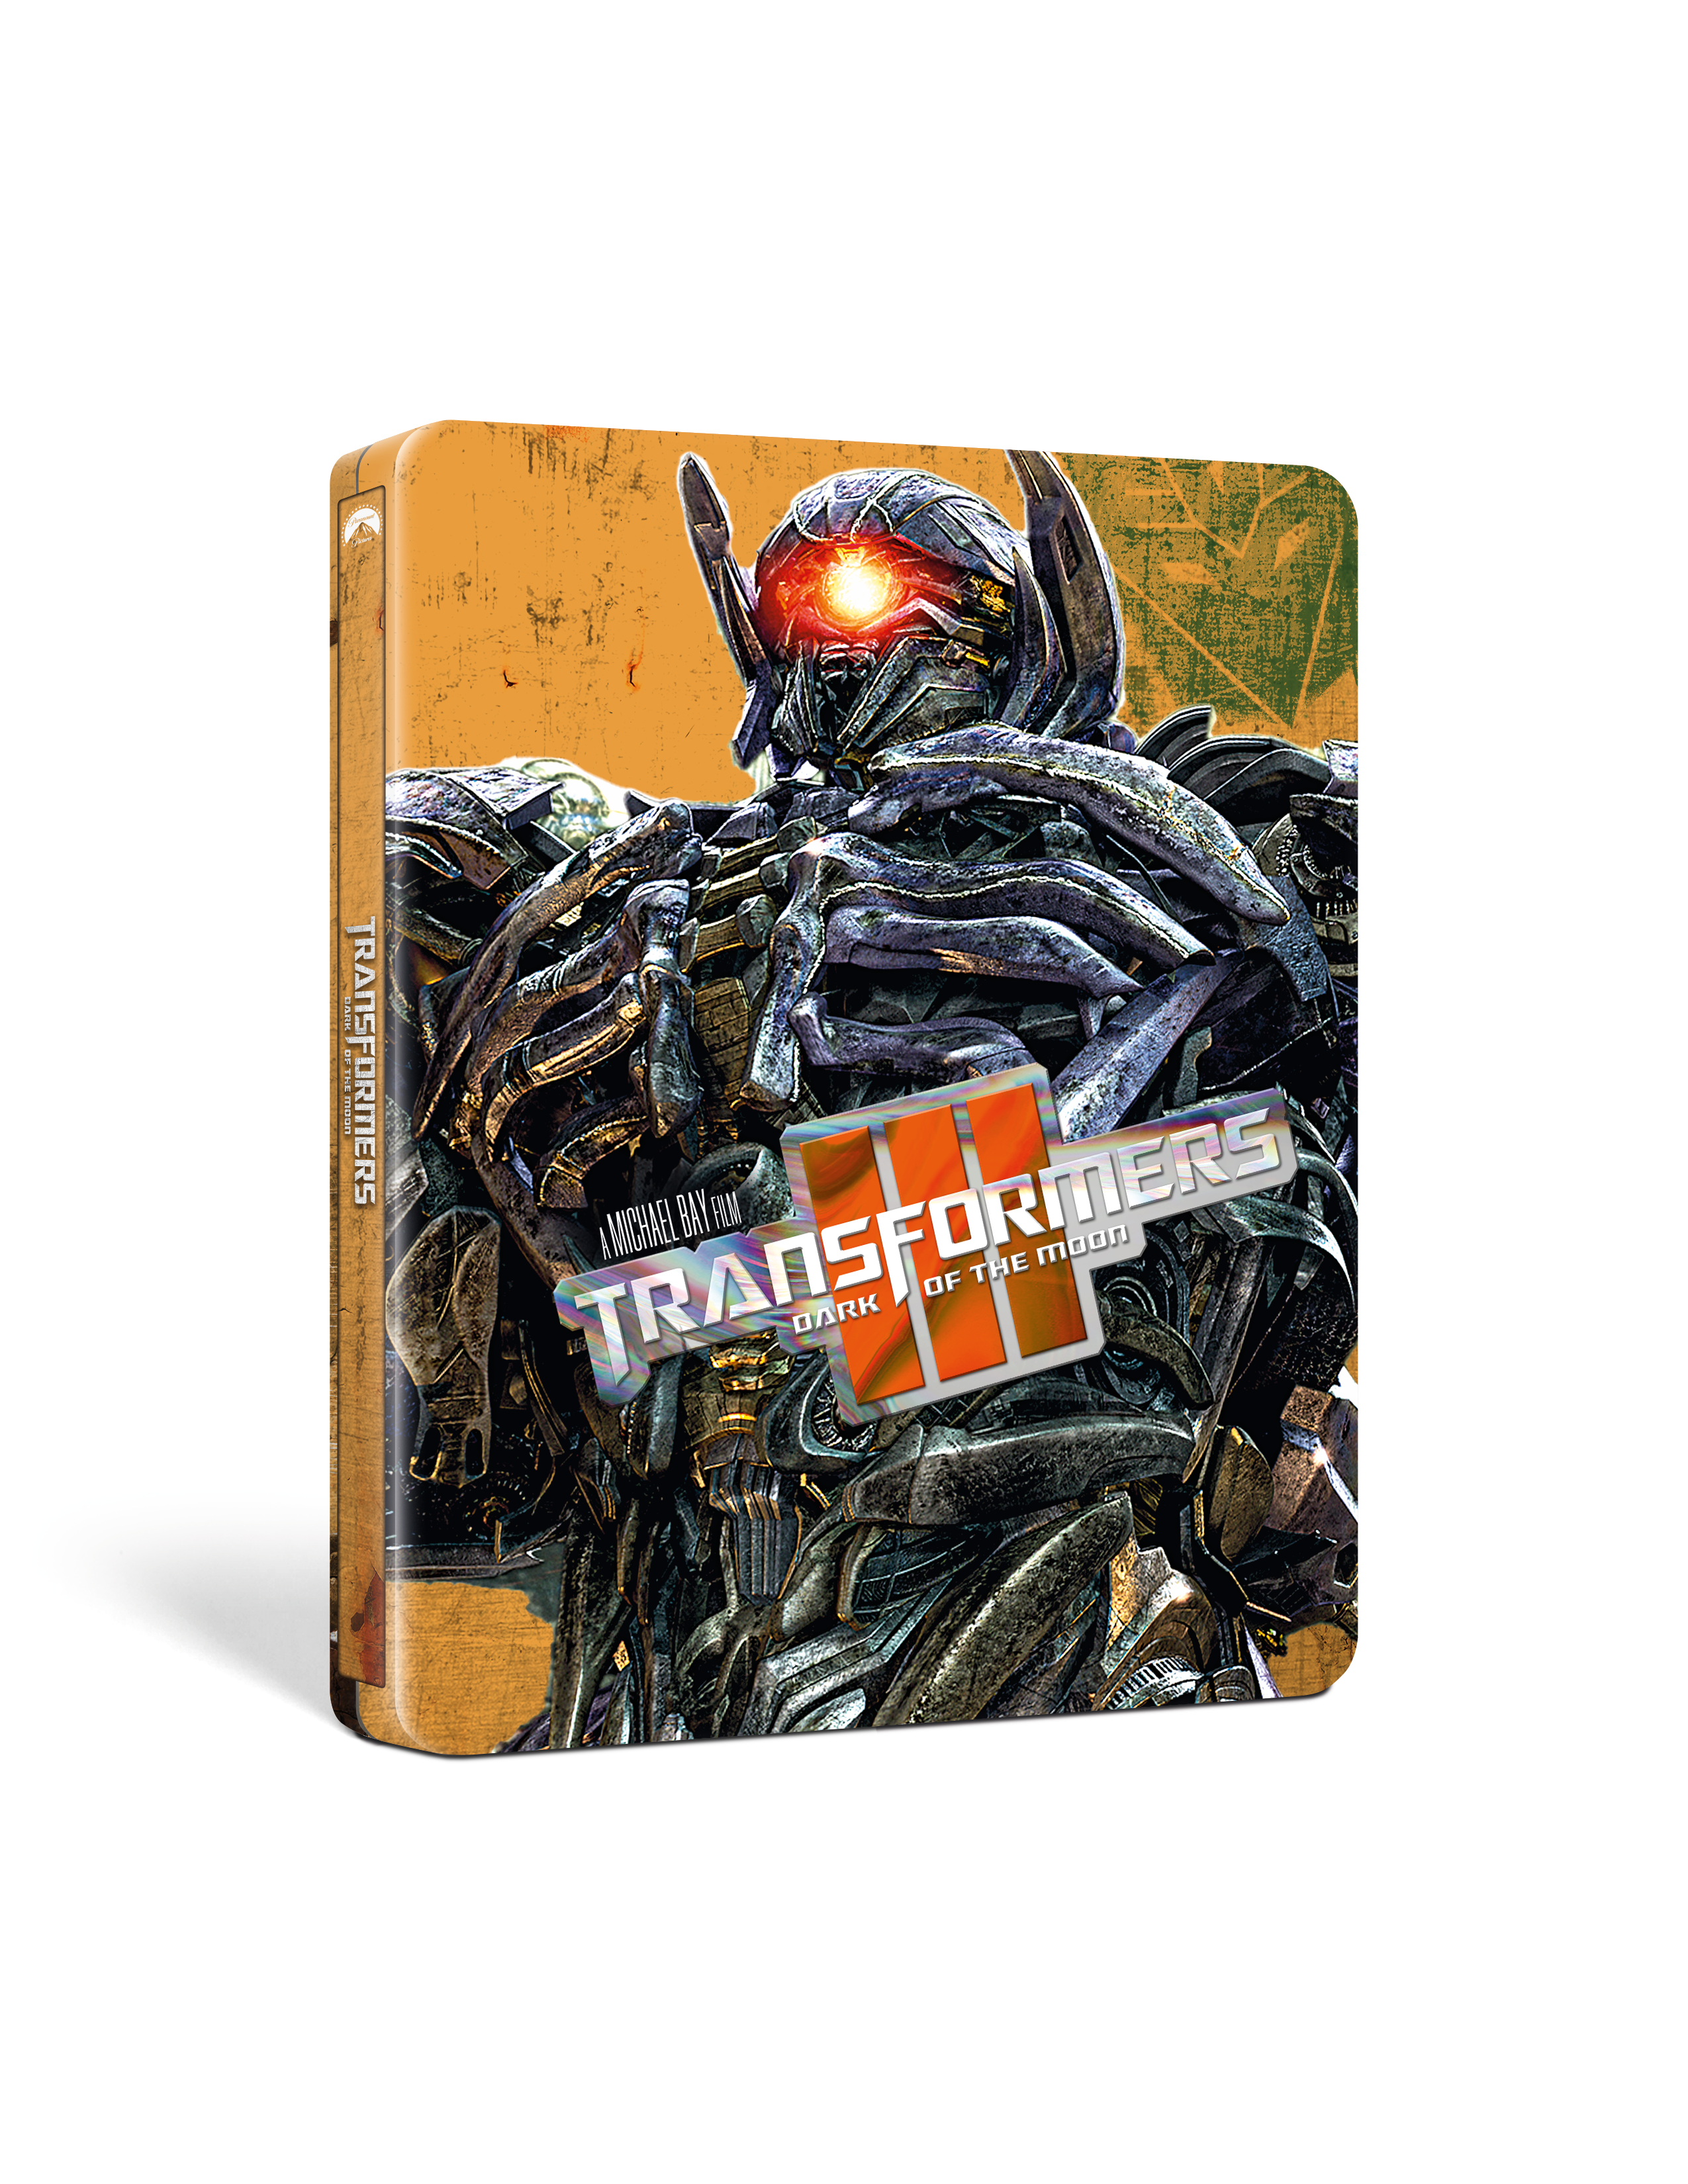 Transformers 6-Movie Collection Steelbook cover (Paramount Pictures)